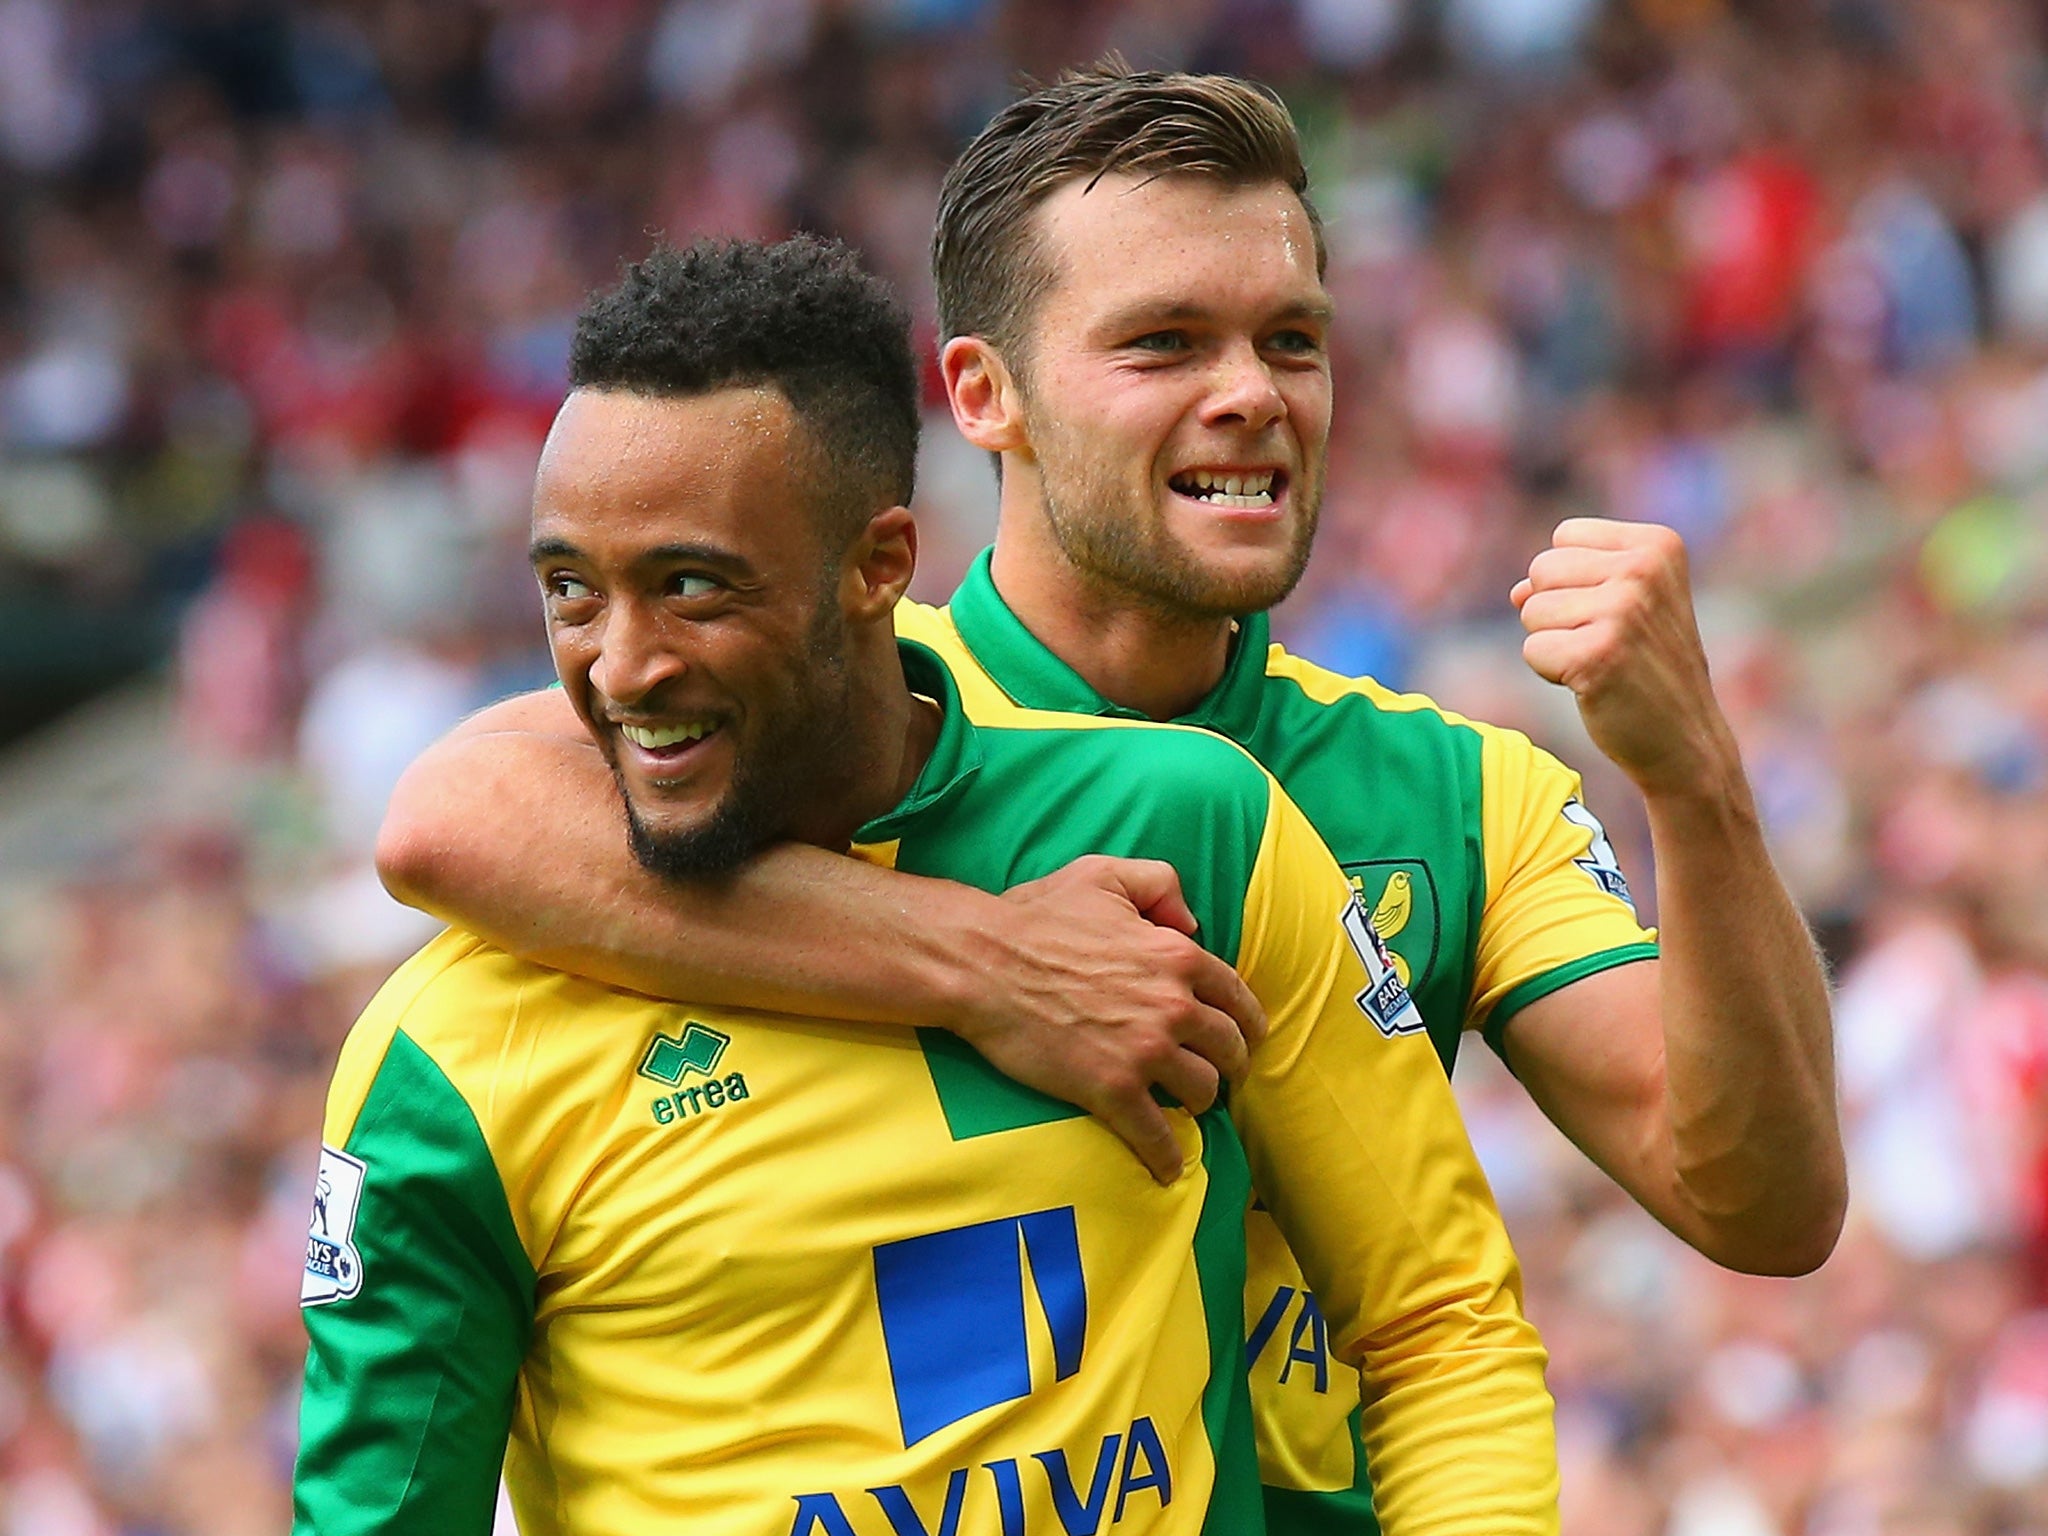 Nathan Redmond’s pace (front) gave Norwich some cutting edge on the break during their win at Sunderland